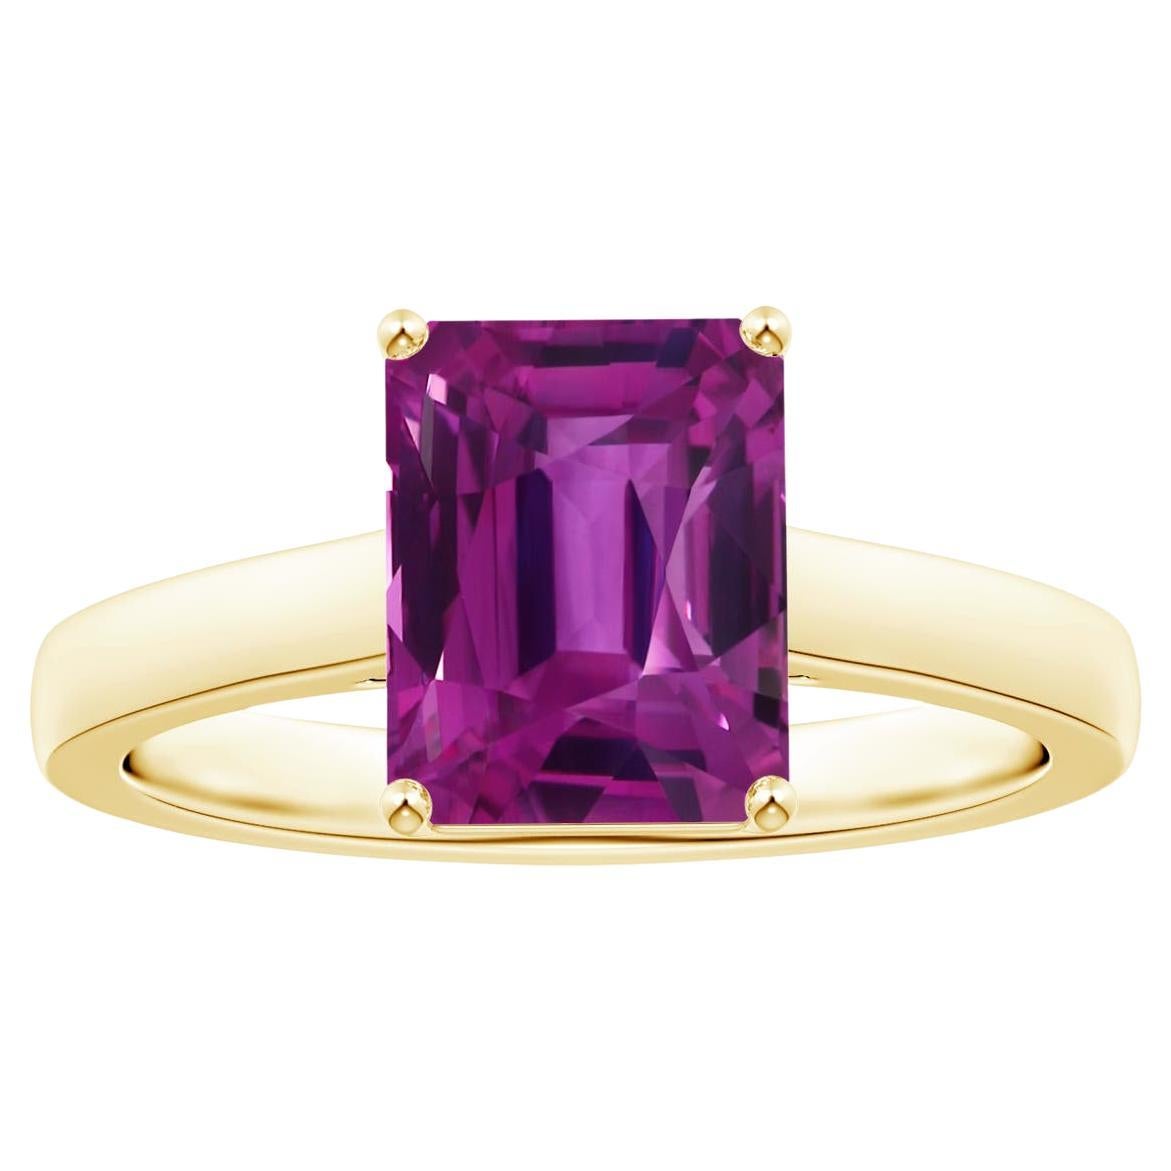 For Sale:  ANGARA GIA Certified Emerald-Cut Pink Sapphire Solitaire Ring in Yellow Gold